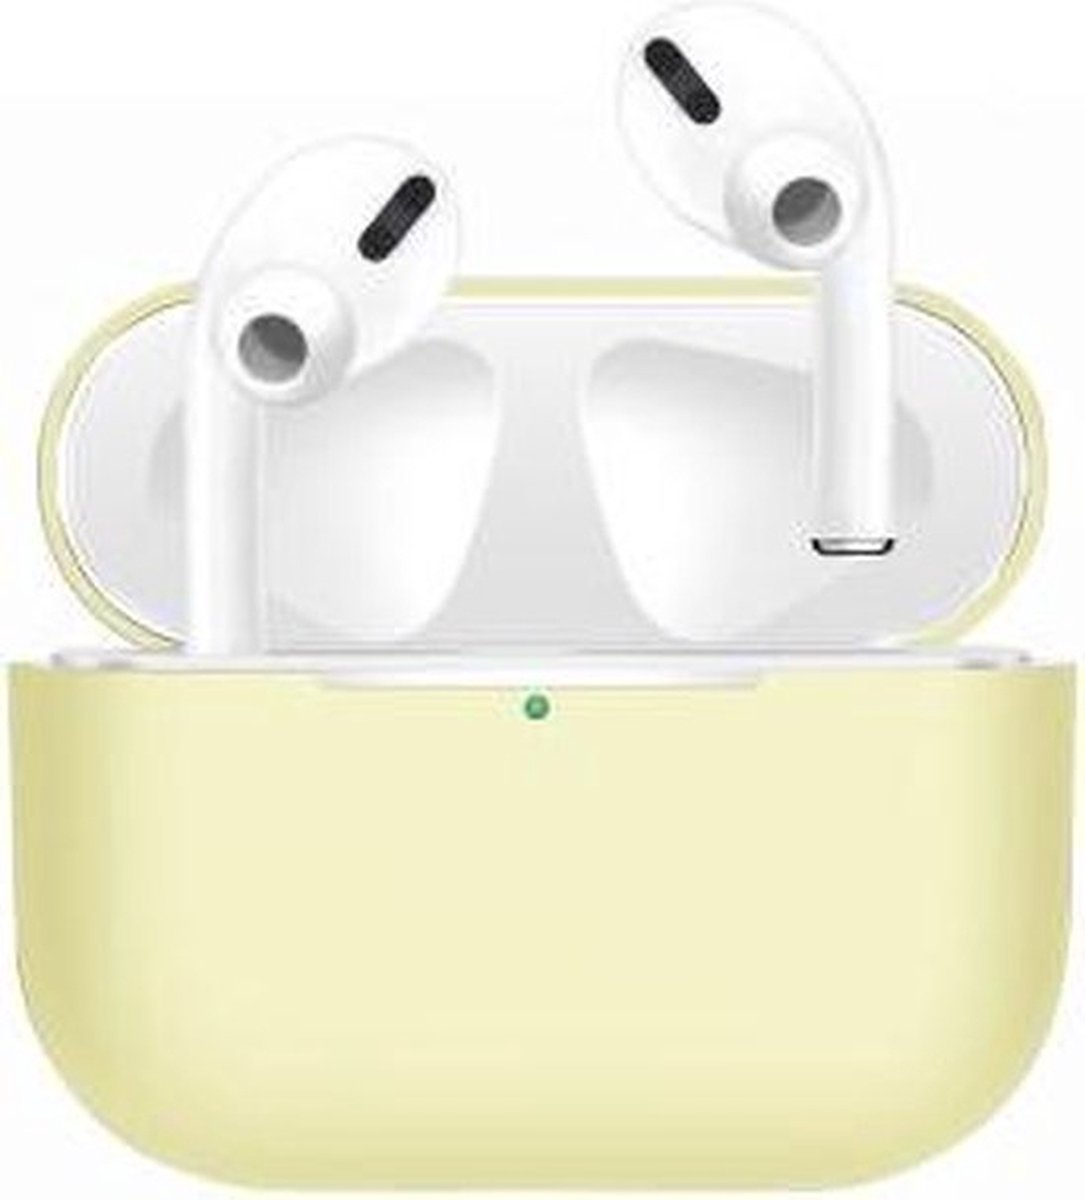 Apple AirPods Pro - Siliconen Case Cover - Hoesje voor AirPods - Geschikt voor AirPods Pro - Eendelig - Kleur Geel